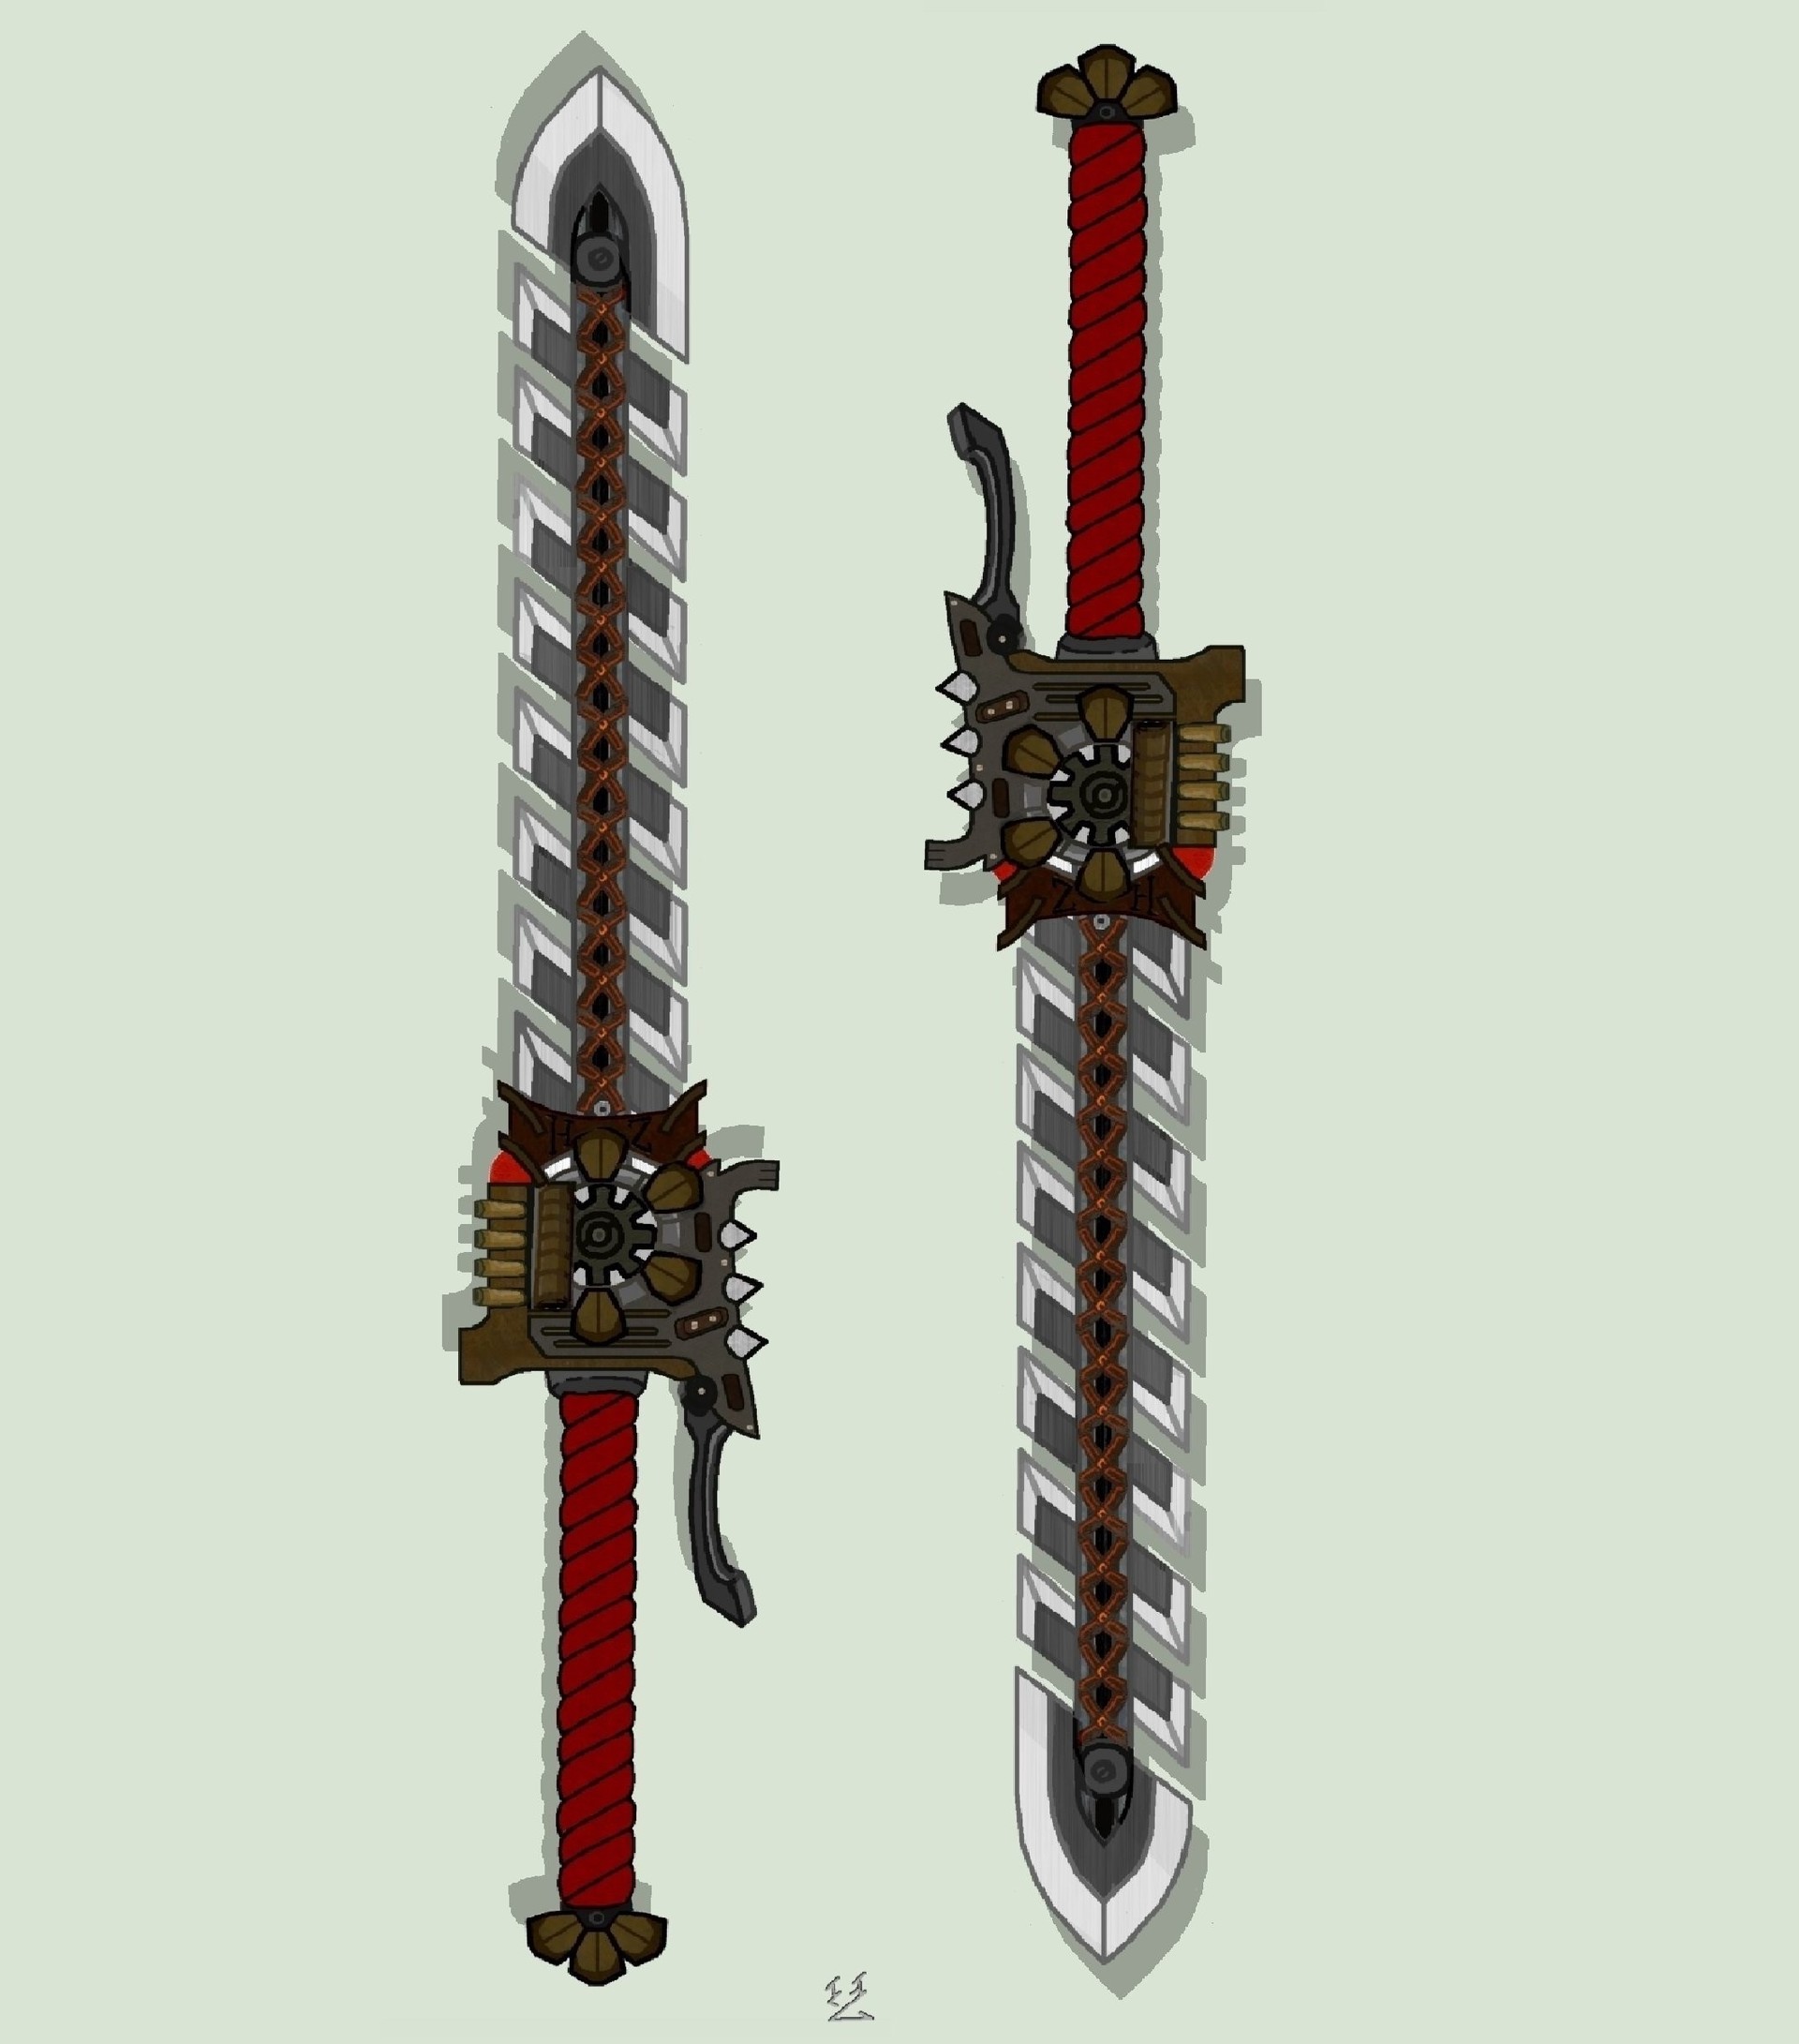 Animated) Saw Sword, Dave Walters 